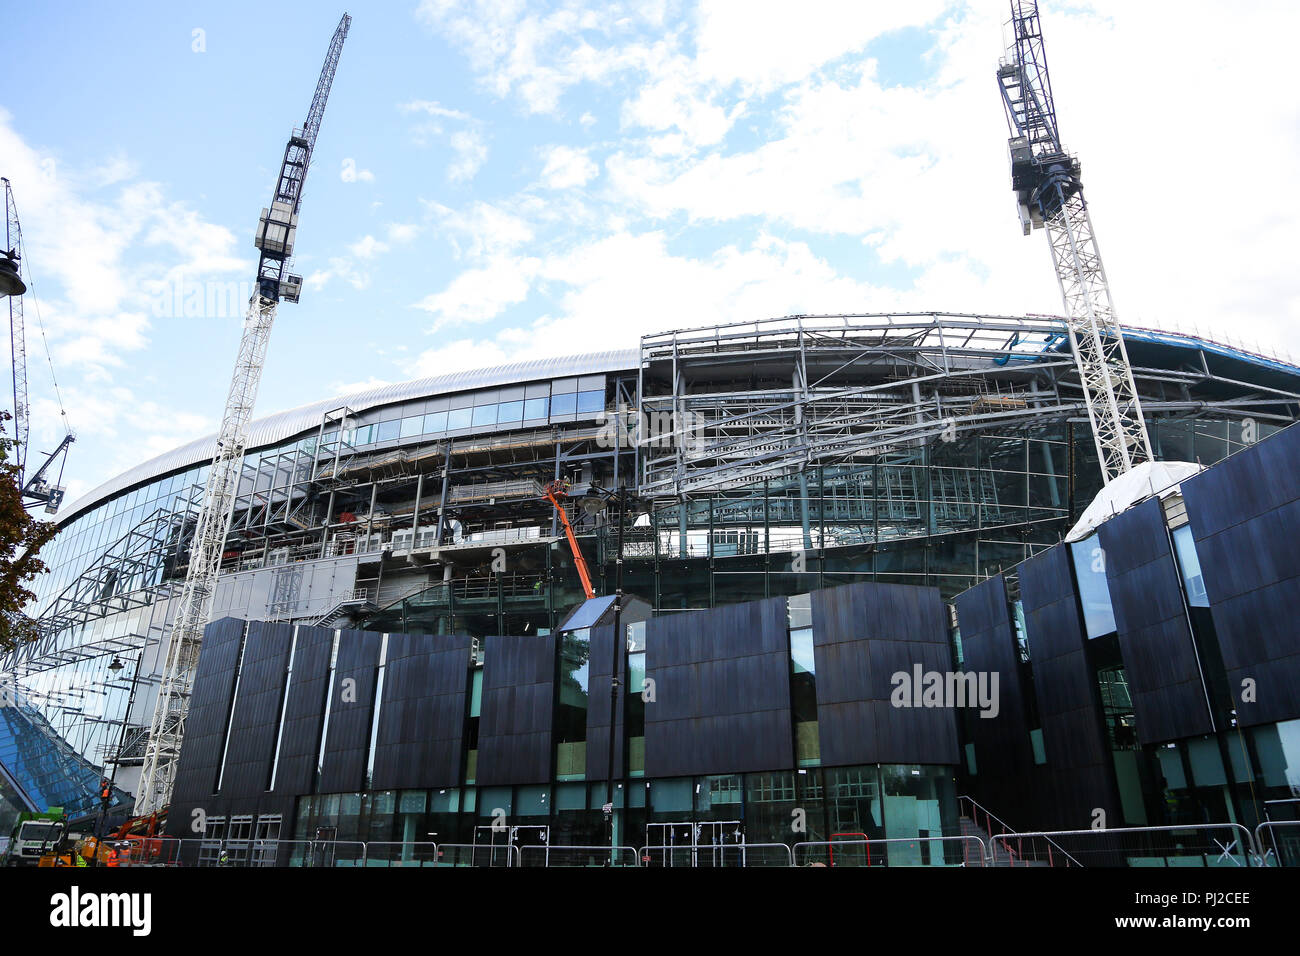 Tottenham Hotspur. North London. UK 4 Sept 2018 - Ongoing construction work  of Tottenham Hotspur's new football stadium in north London. Spurs will face  Chelsea on November 24 in their brand new £